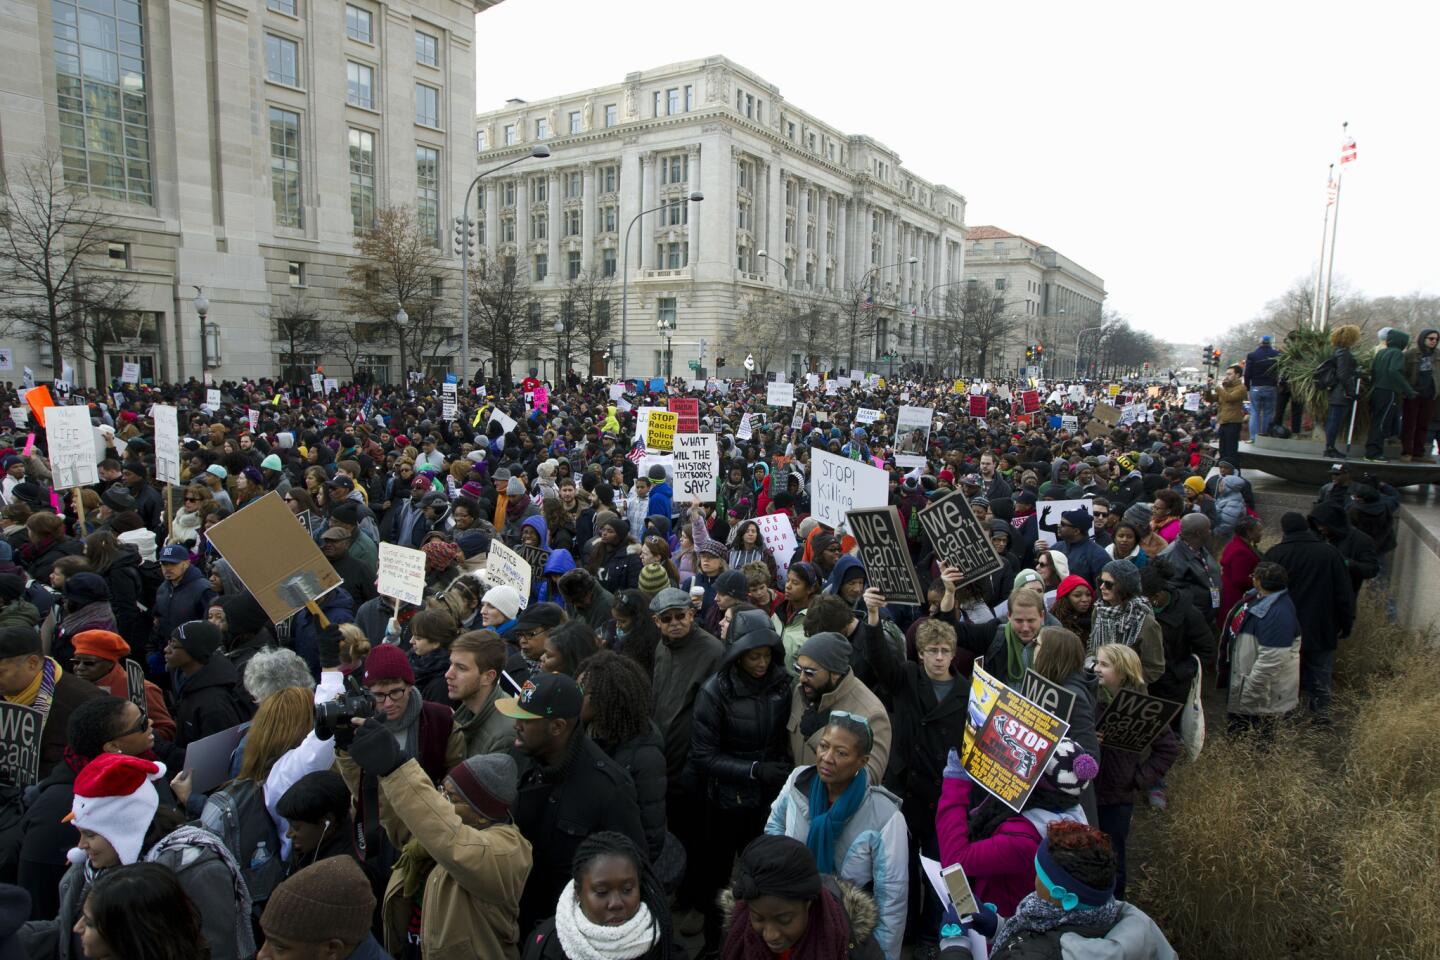 Thousands take part in the Justice for All March and Rally on Pennsylvania Avenue to the US Capitol in Washington, DC, on December 13, 2014, to protest the killings of unarmed African-Americans by police officers and the decisions by Grand Juries to not indict them.